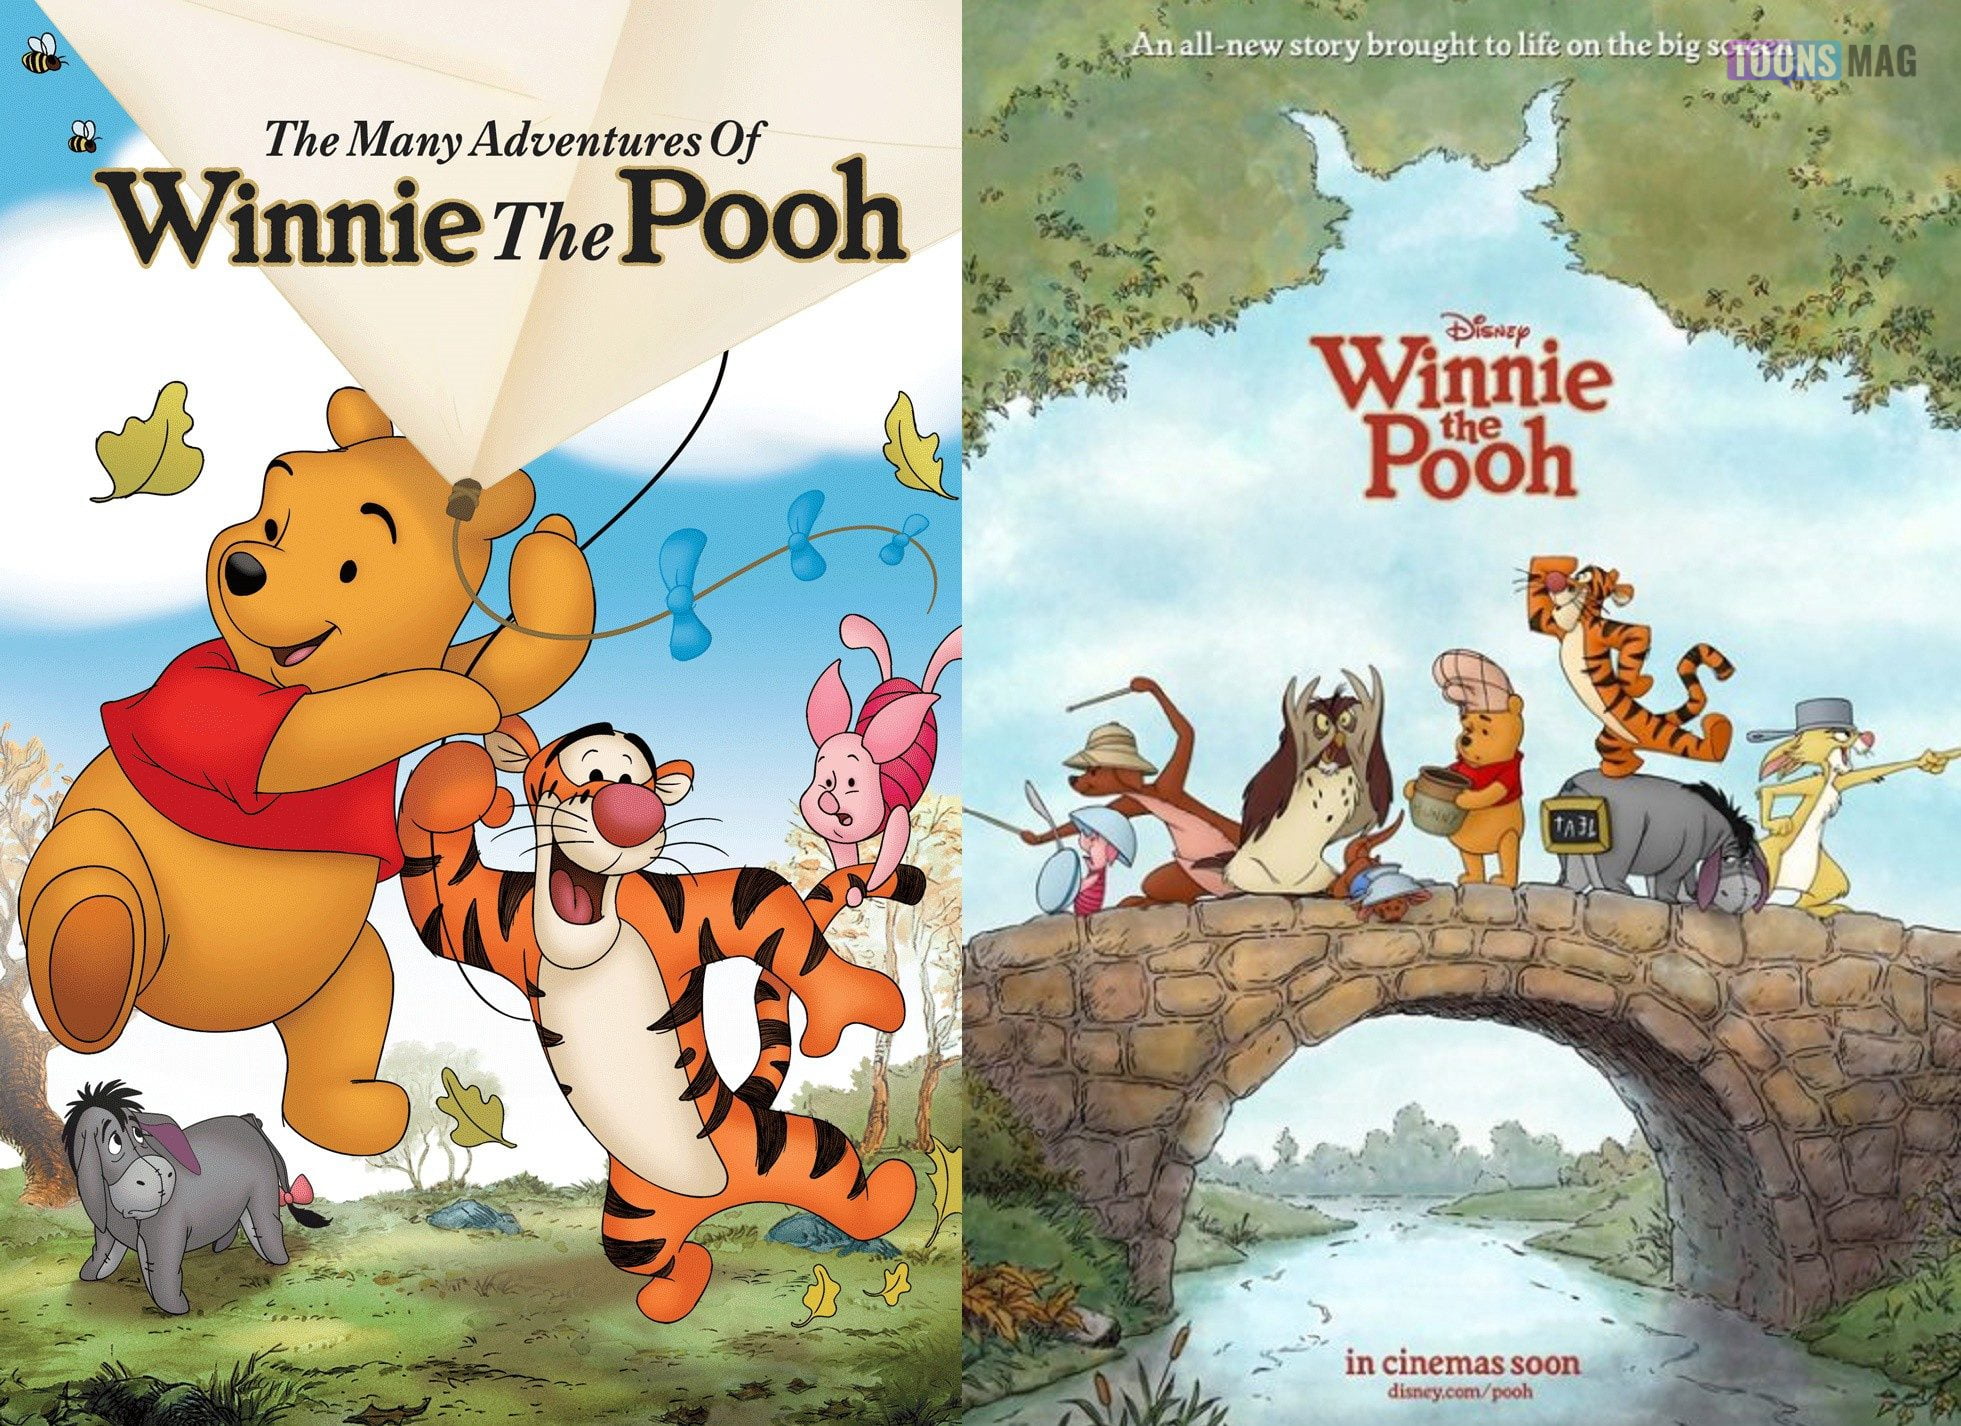 book review of winnie the pooh